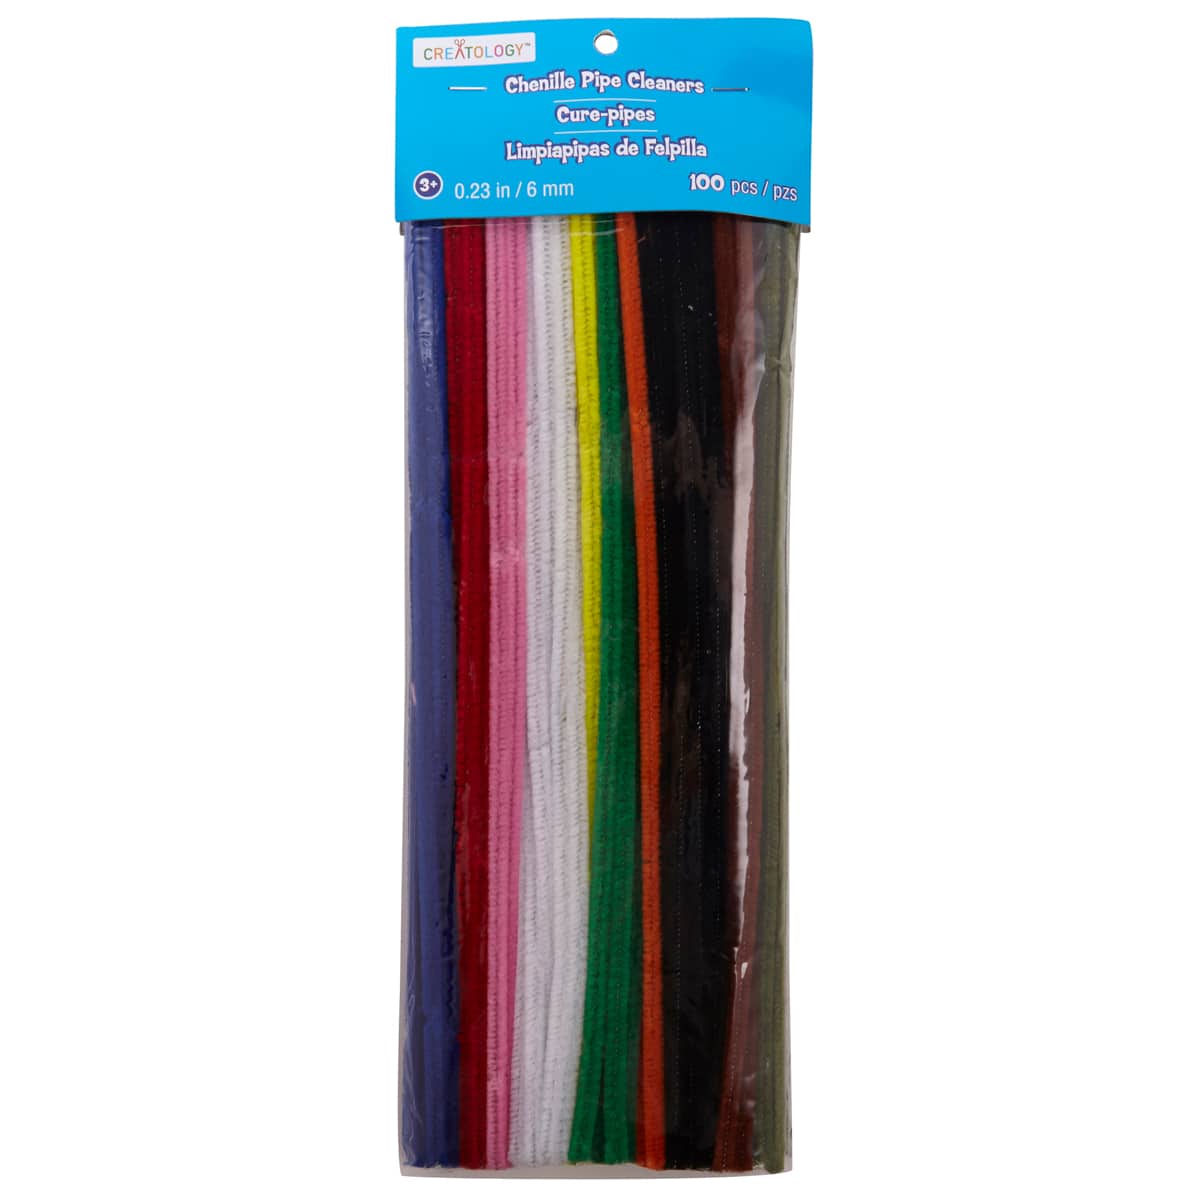 12 Packs: 350 Ct. (4,200 Total) White Chenille Pipe Cleaners by Creatology, Size: 6